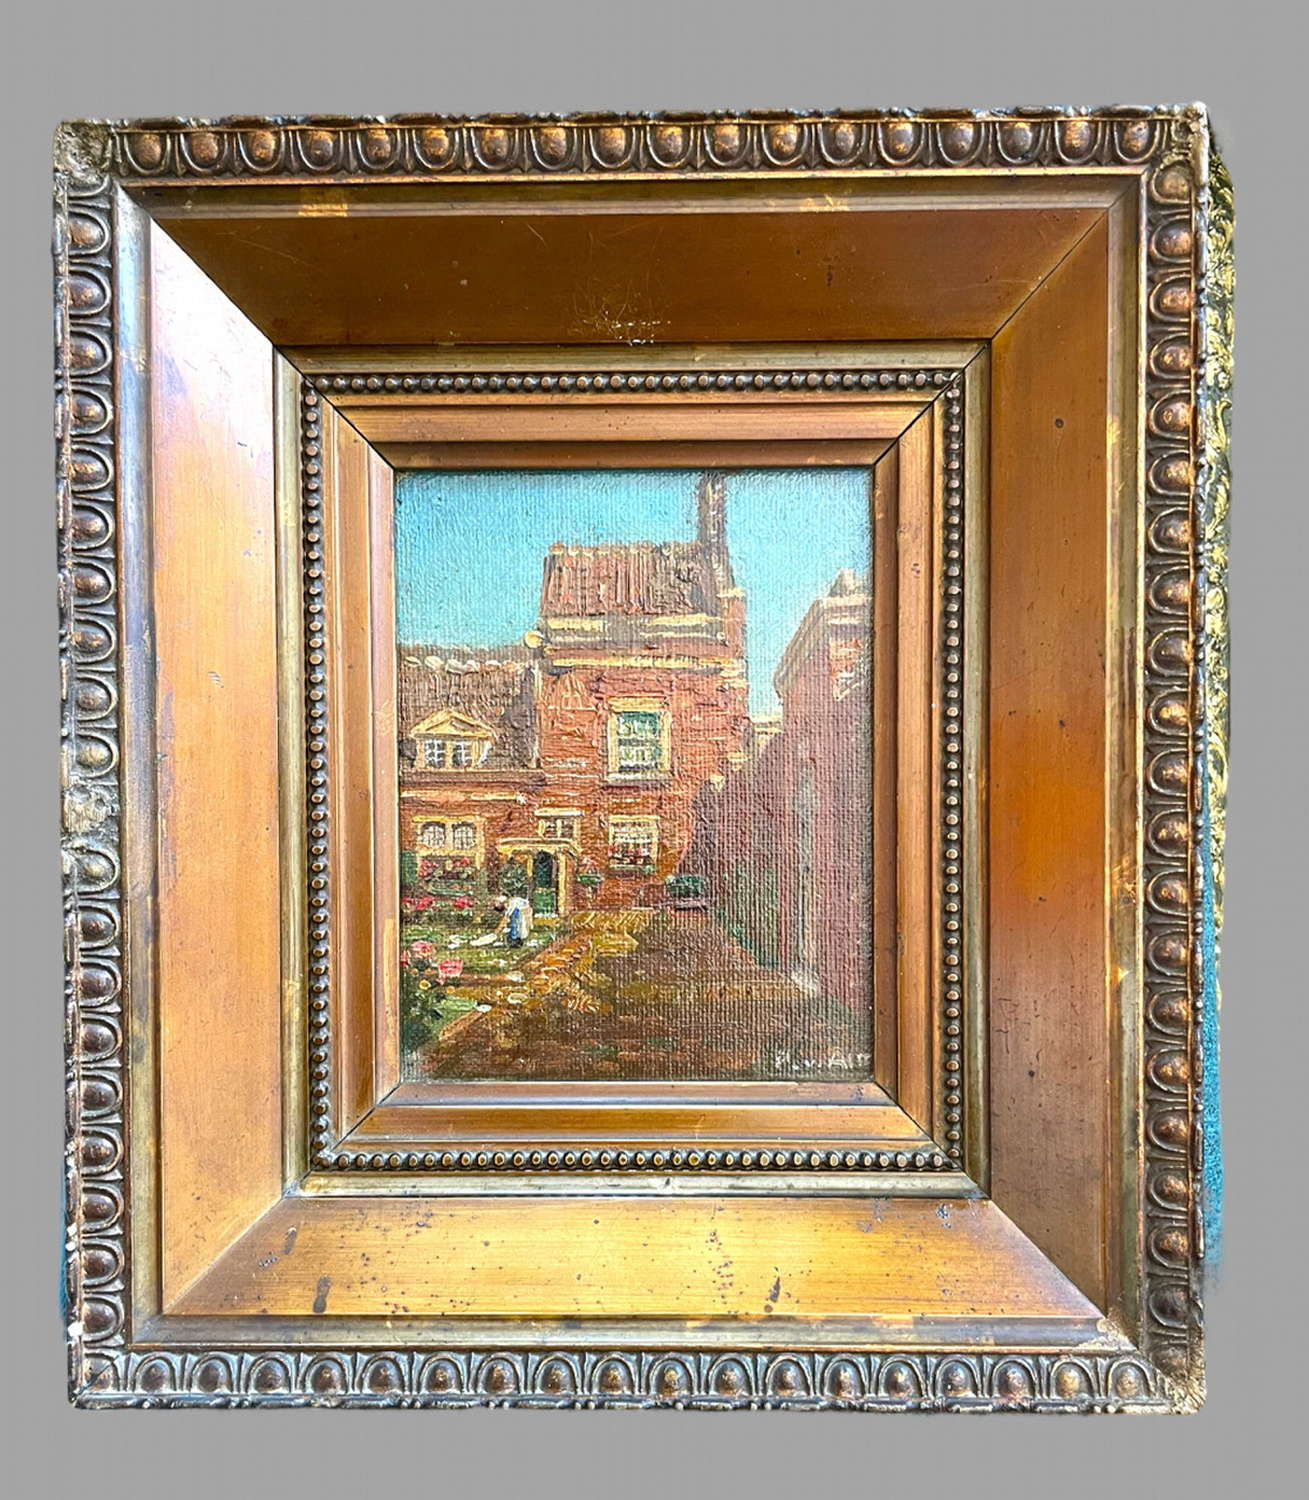 An Acrylic on canvas of the frontal façade of a Dutch ‘hofje